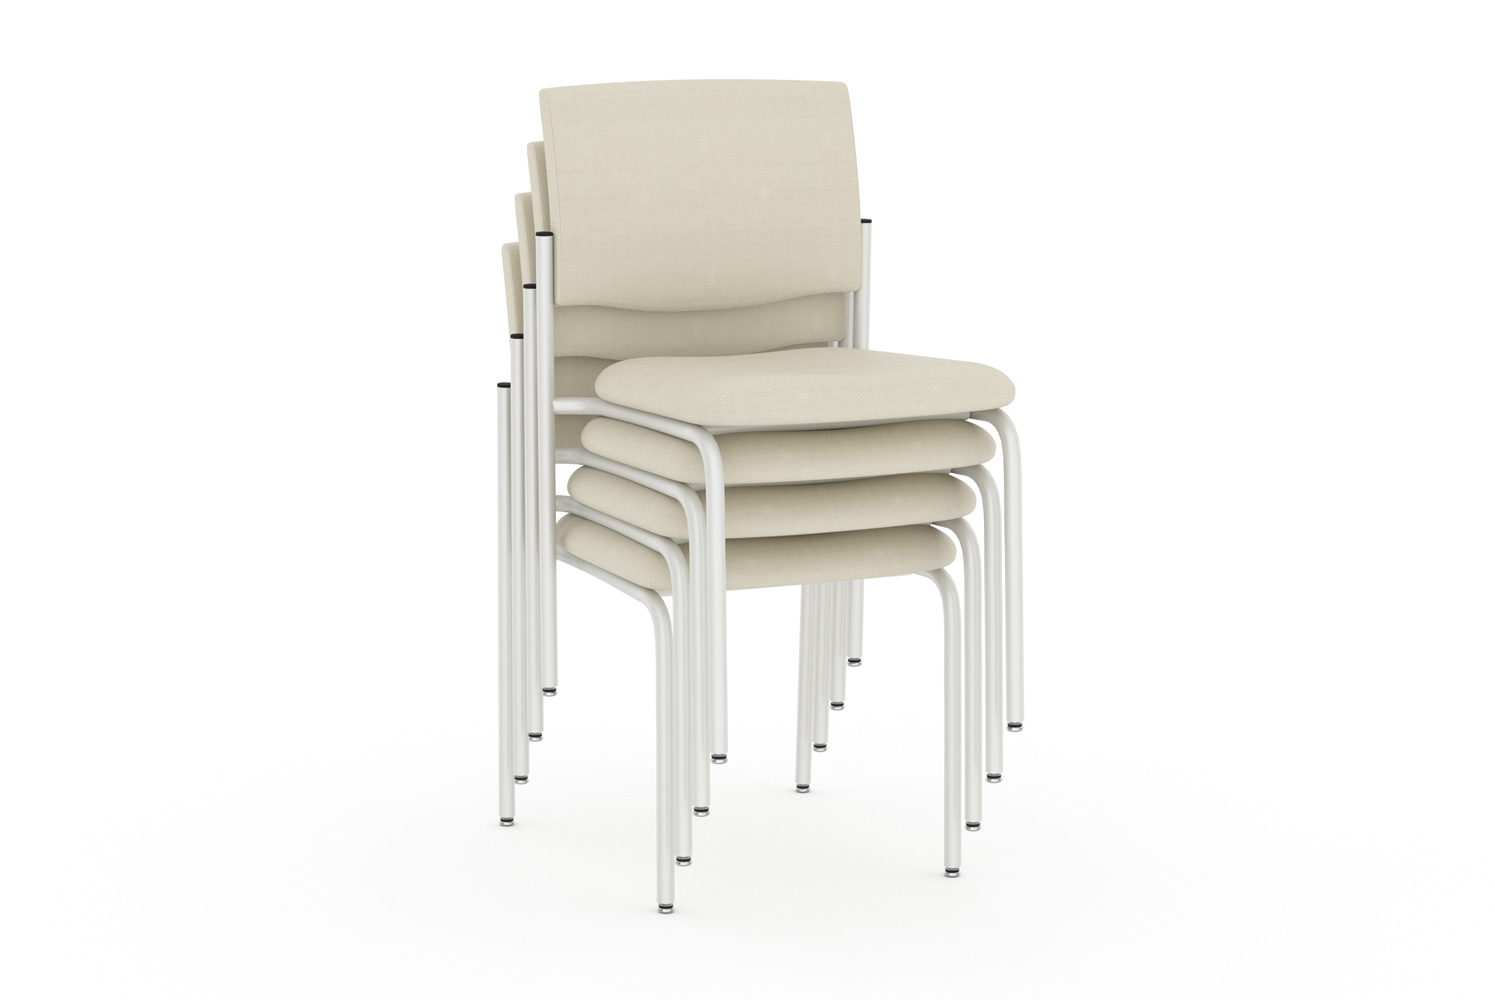 Teriana Stacked Chairs